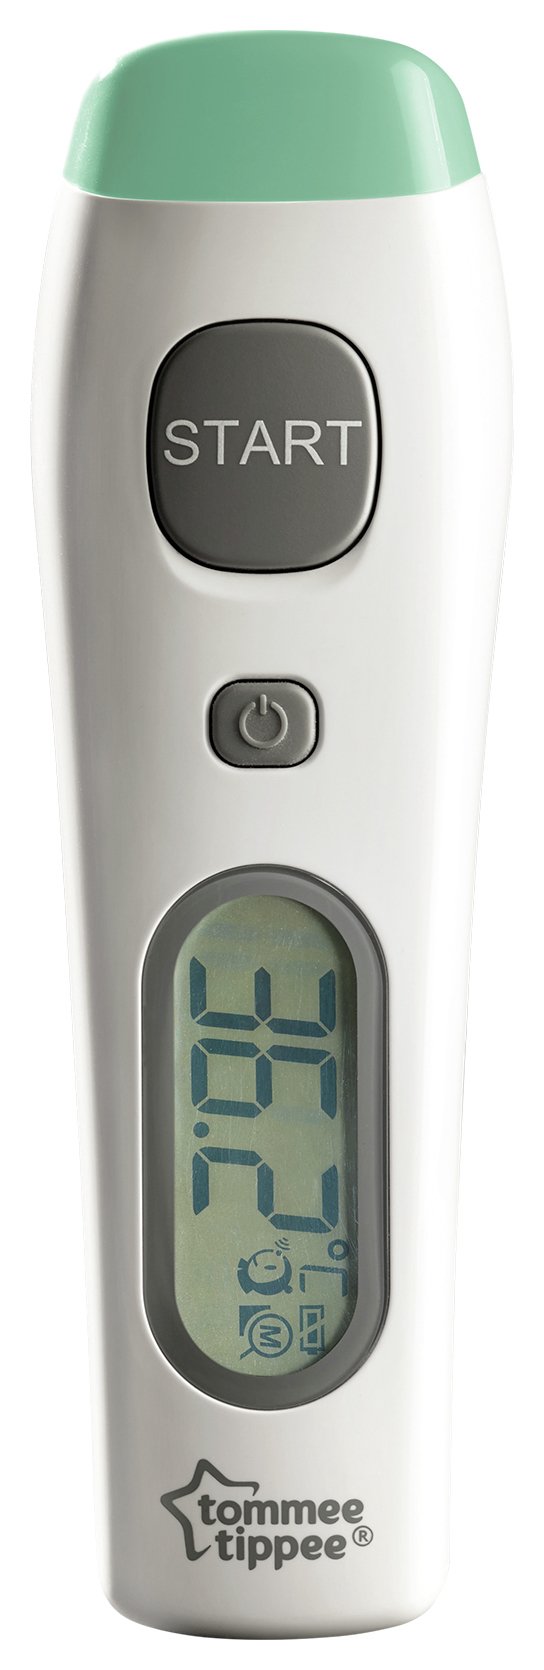 Tommee Tippee No Touch Thermometer